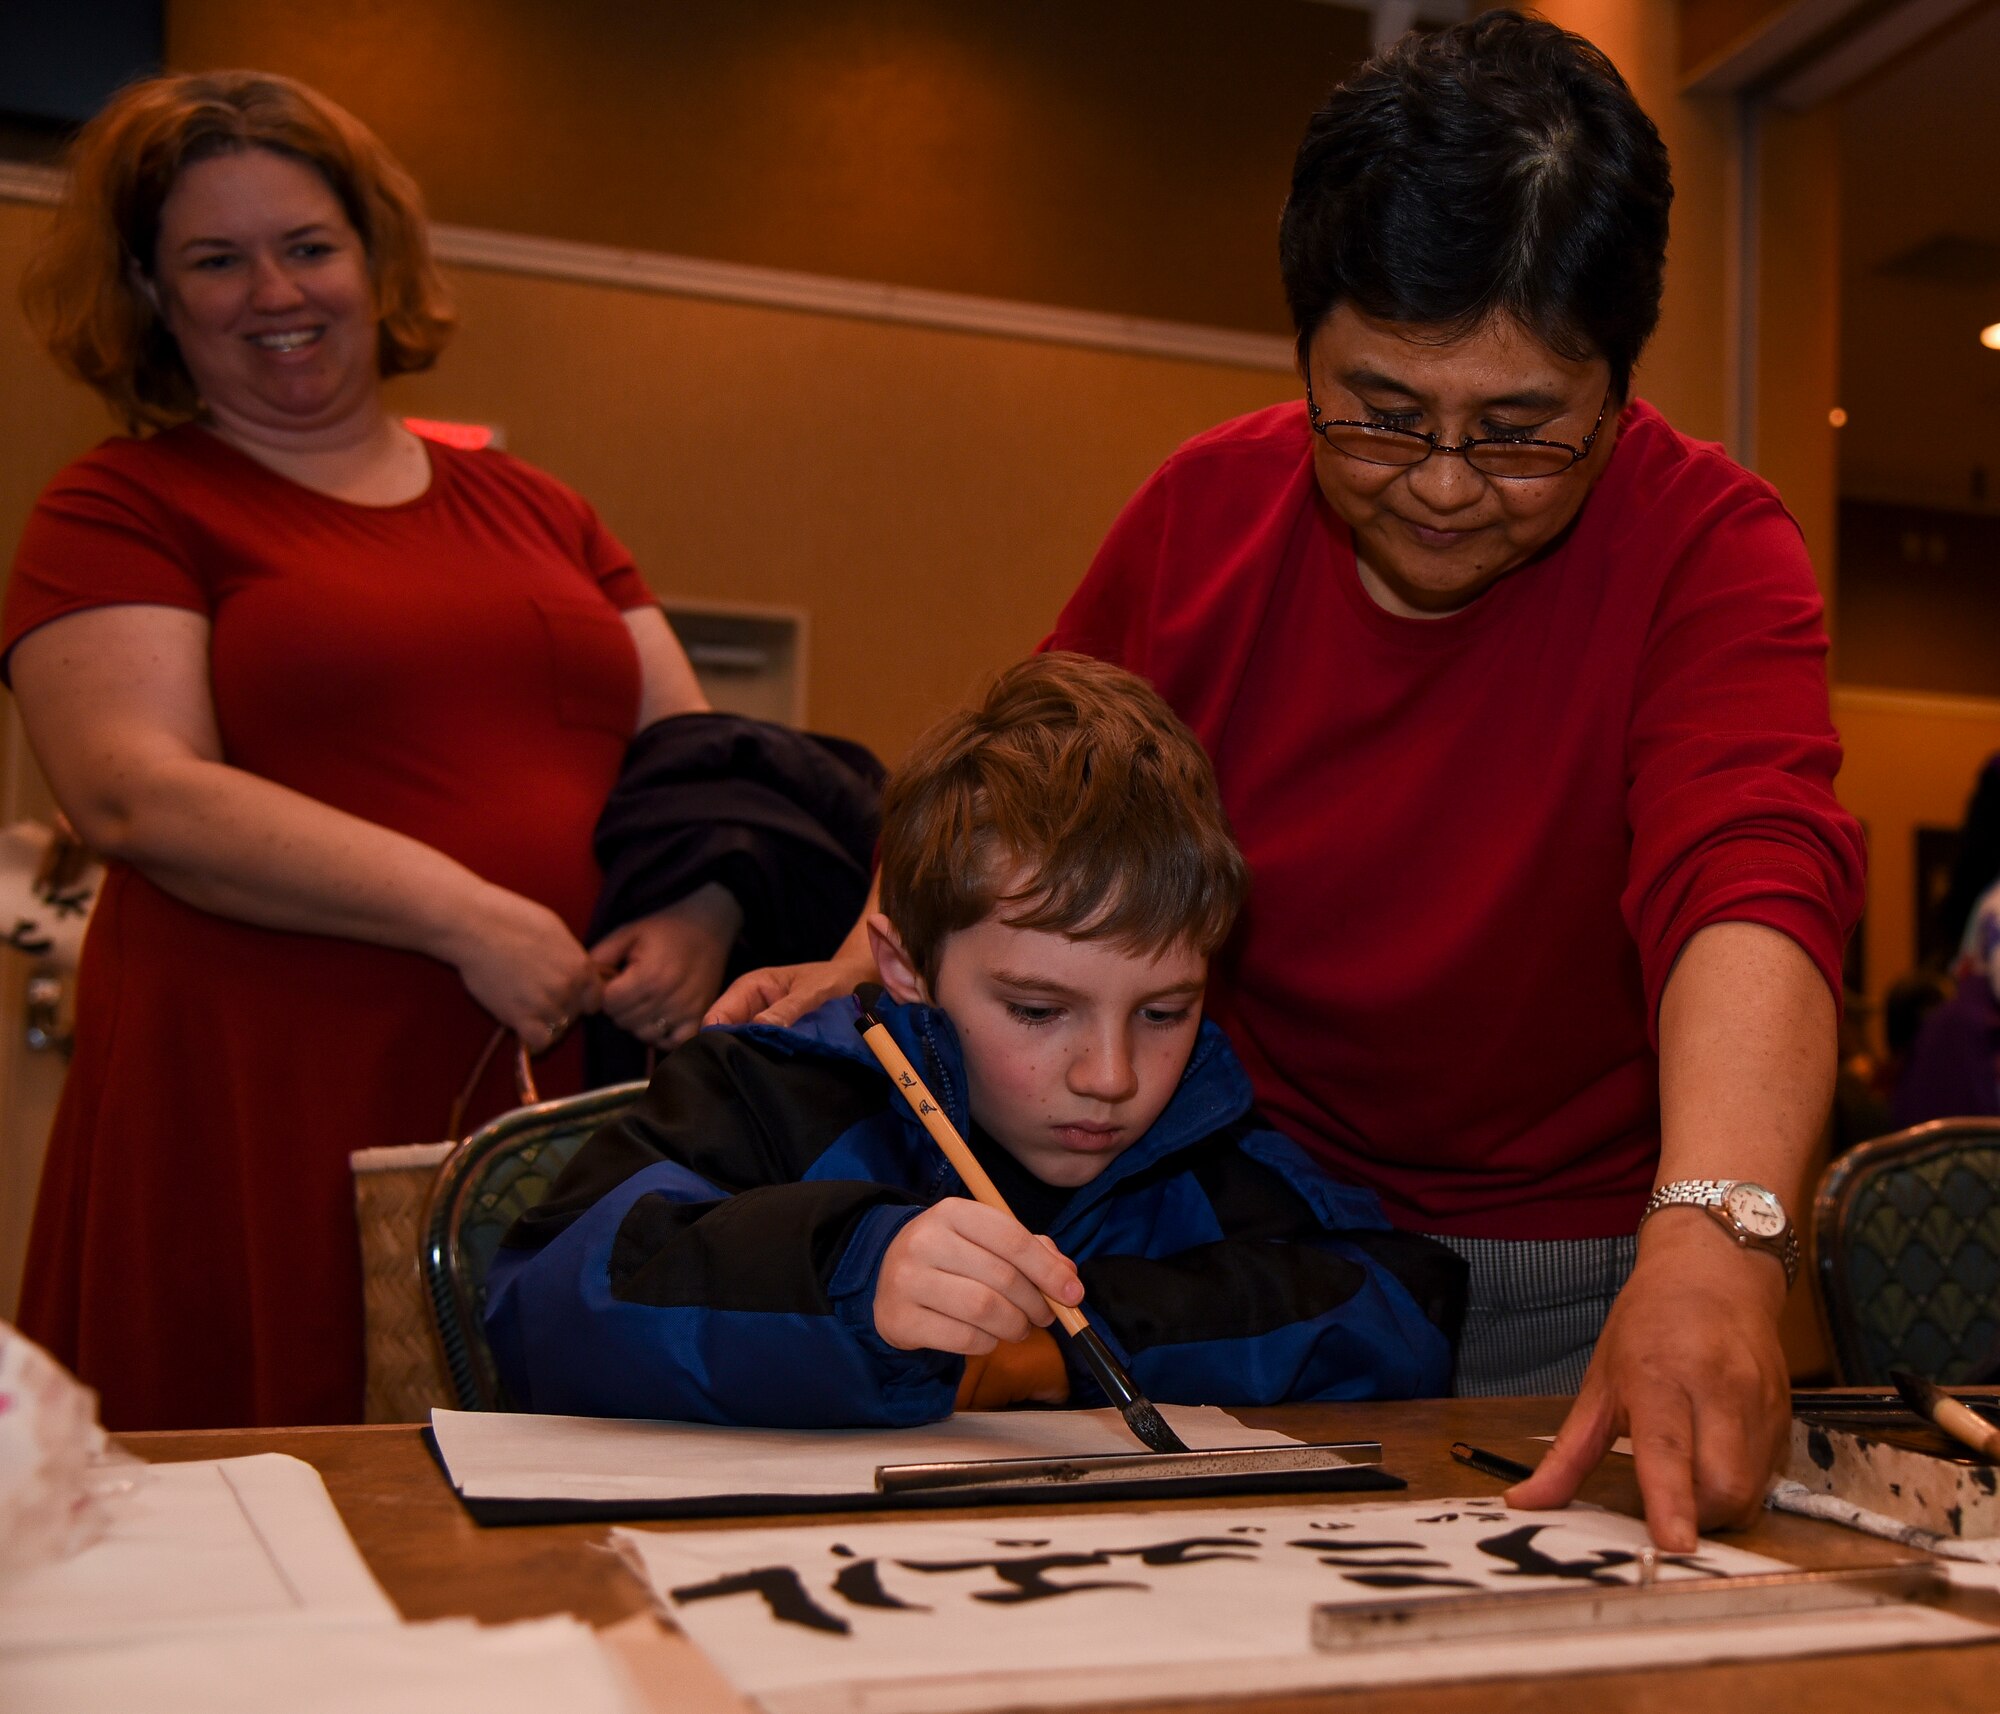 A Japan Day attendee writes his name in “katakana” during an art class during the 32nd Annual Japan Day festival at Misawa Air Base, Japan, April 6, 2019. Japanese calligraphy is the ancient Japanese practice of artistic hand writing. “Katakana” characters are commonly used for words from foreign languages. (U.S. Air Force photo by Branden Yamada)